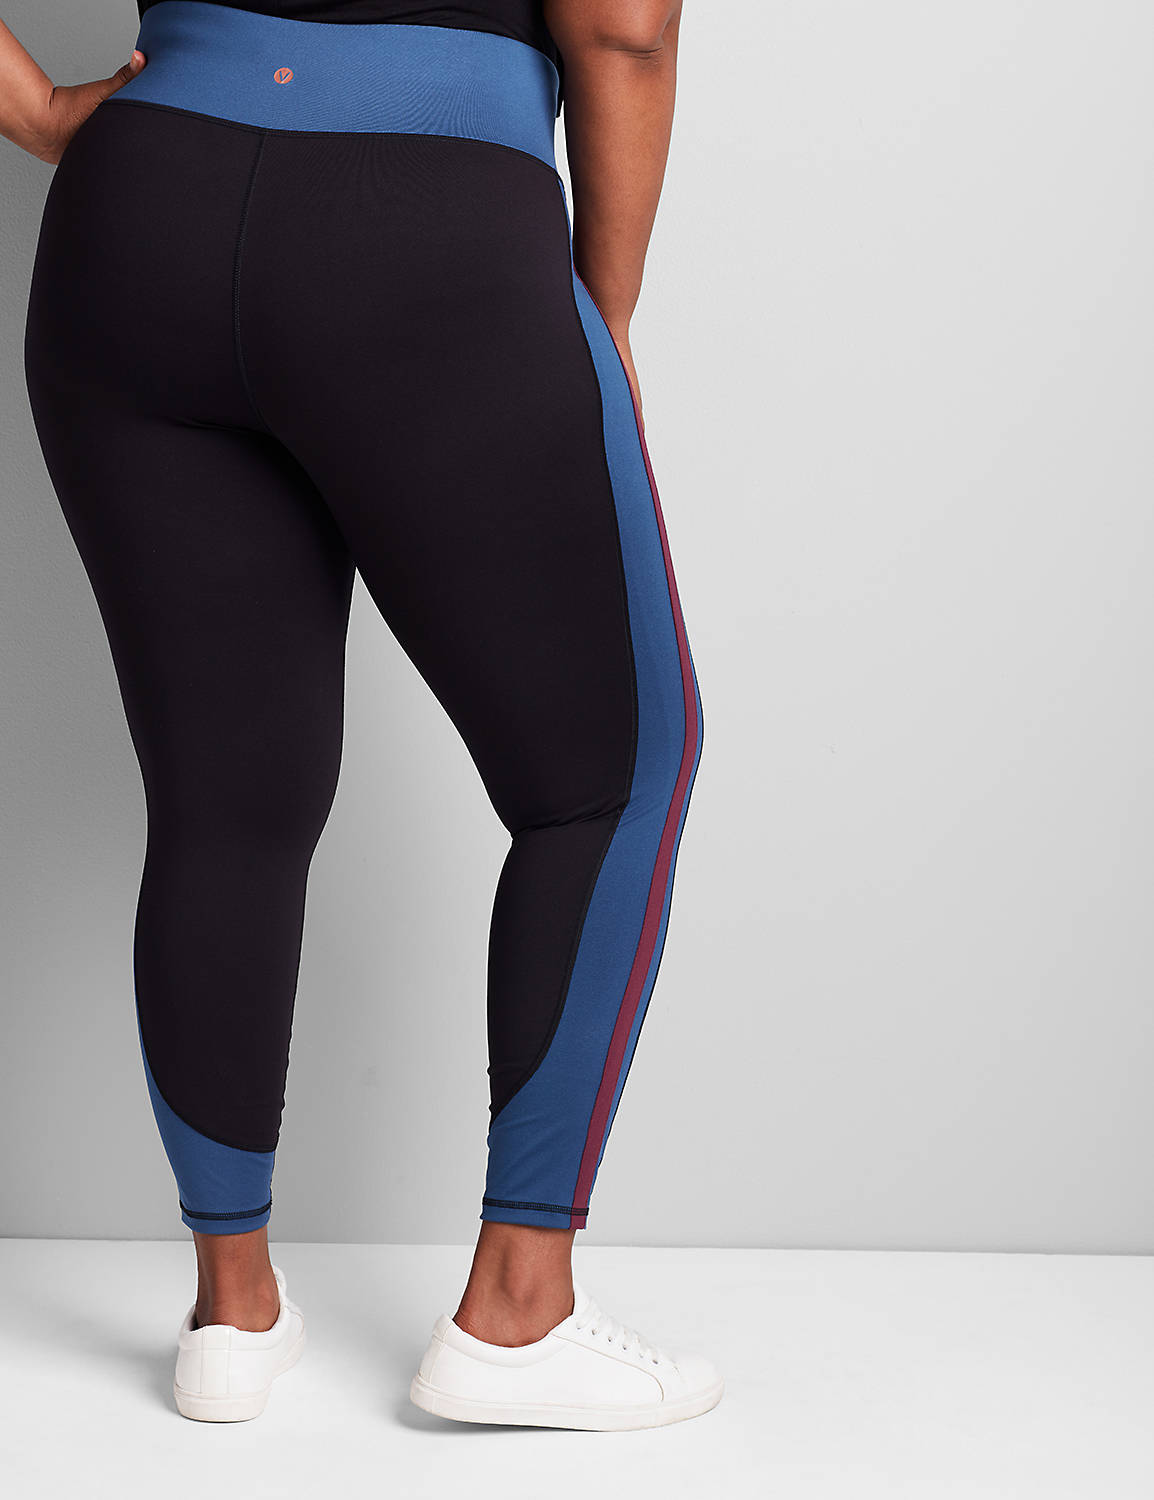 Power Color Block Wicking 7/8 Legging F 1114130:Club Navy 73-0002-19:22/24 Product Image 2